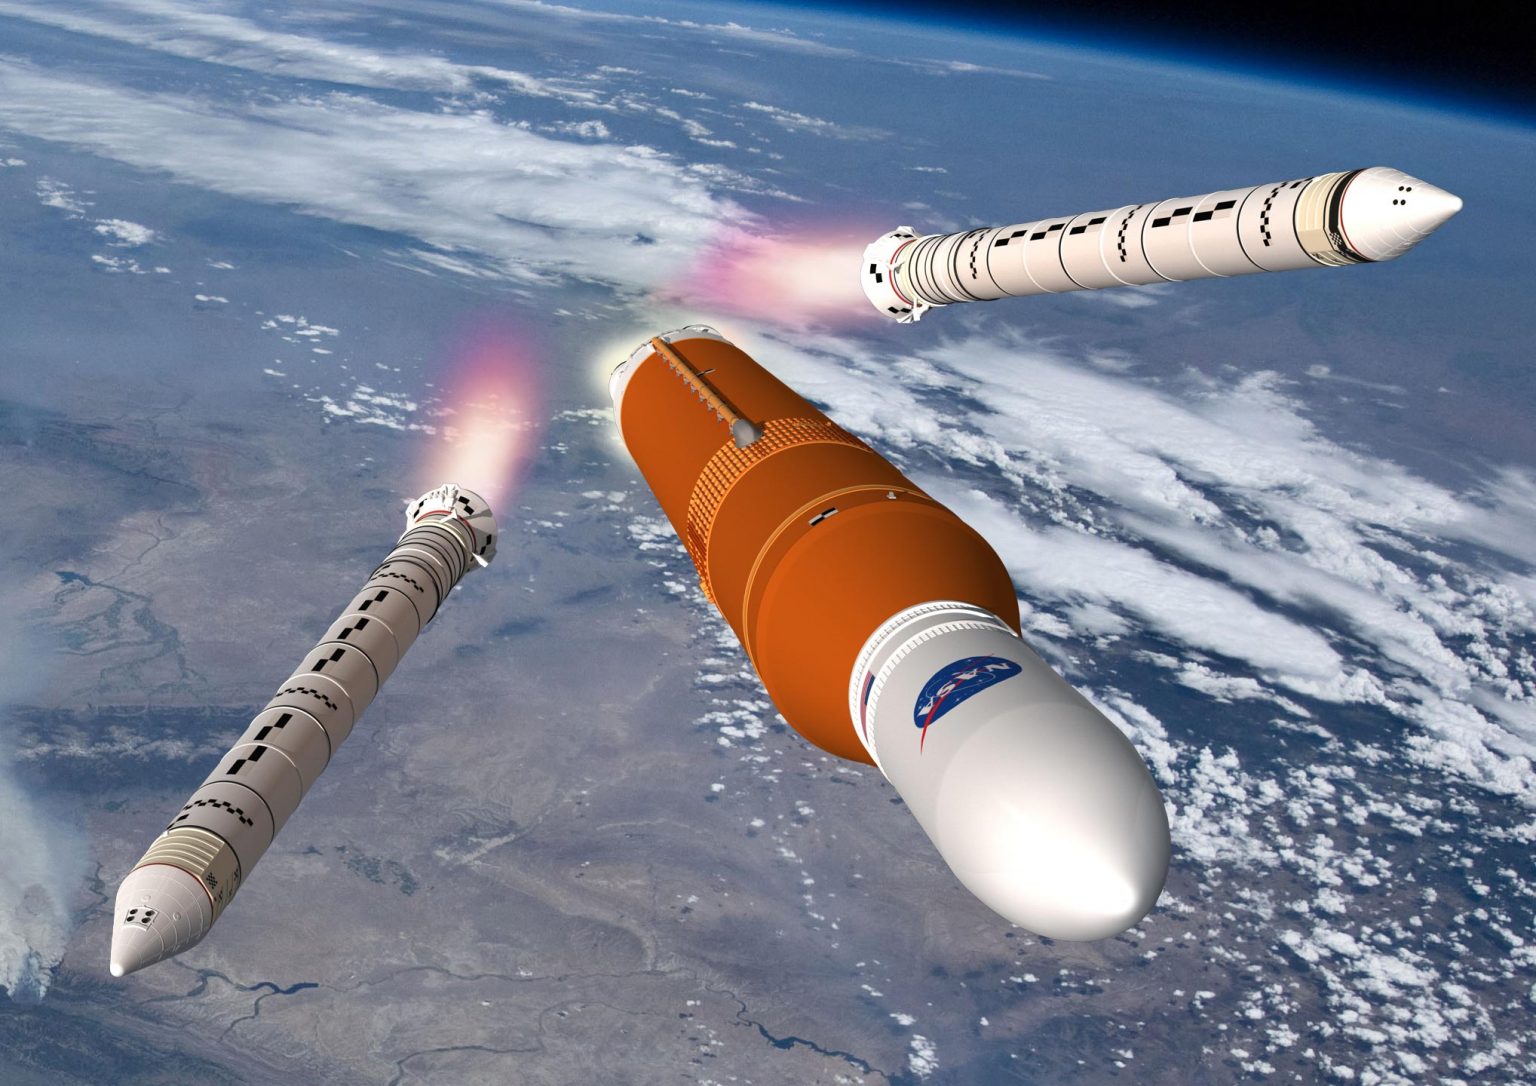 Spectacular Space Missions to Look Forward to in 2022